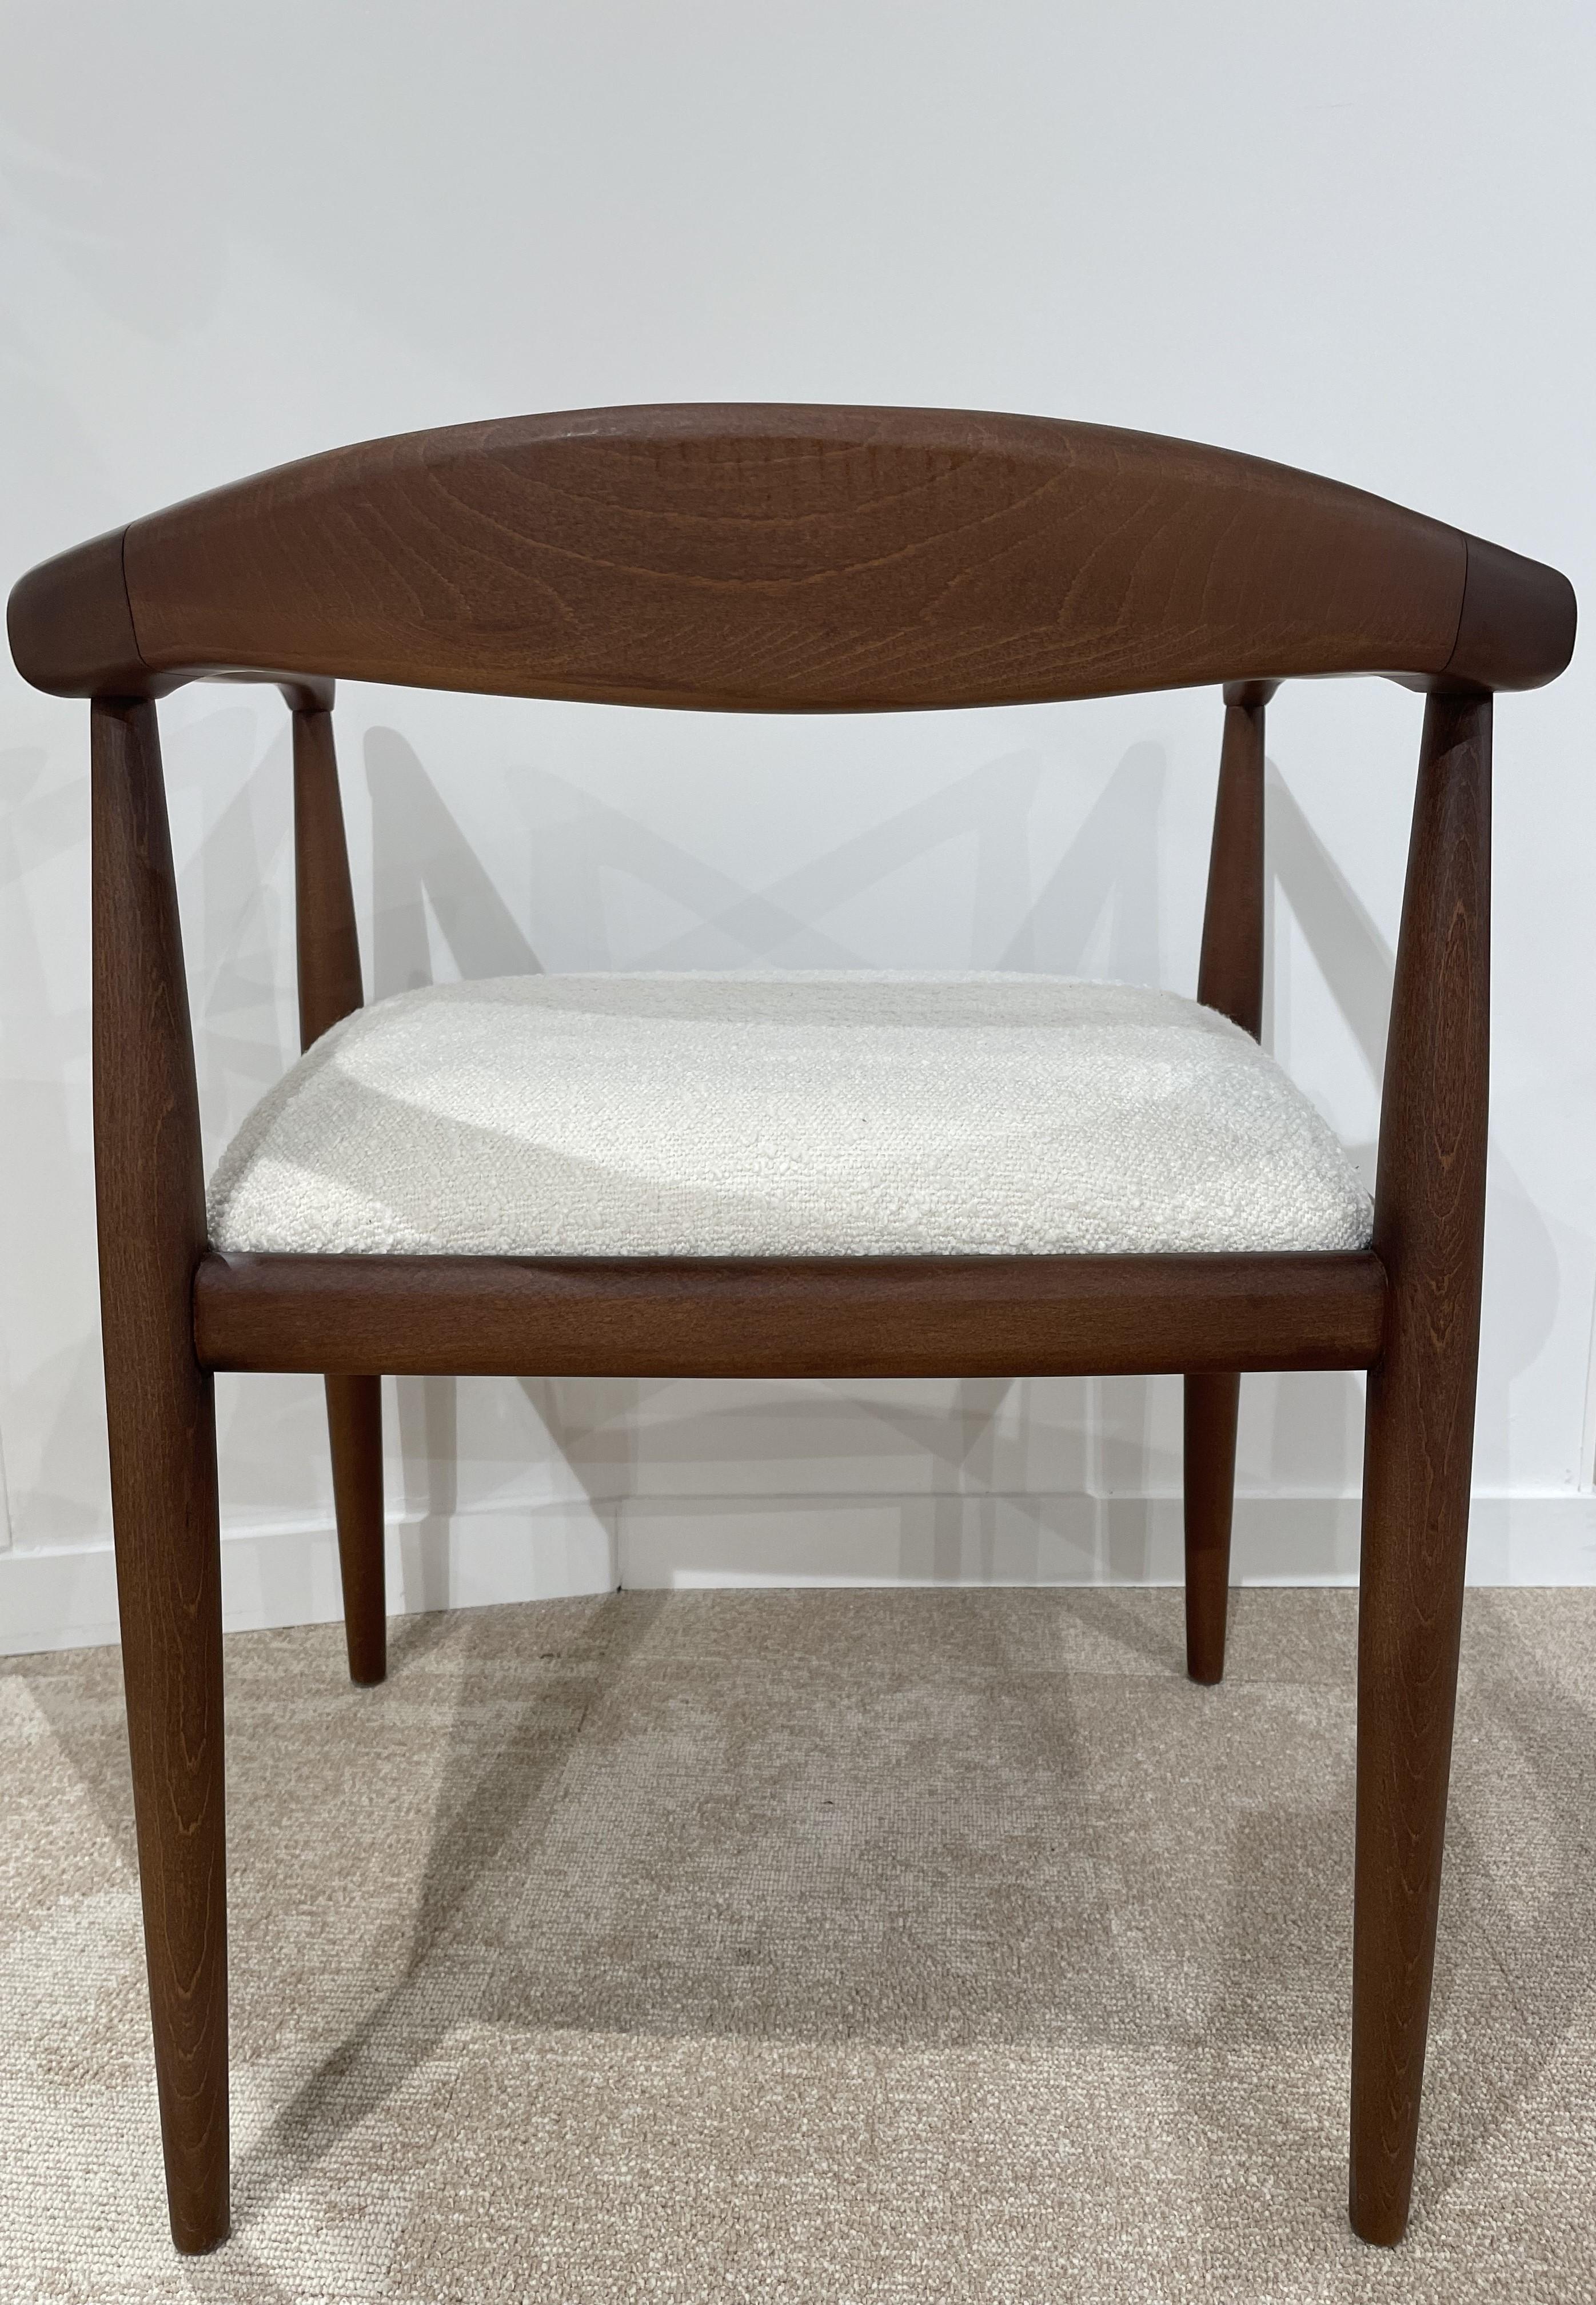 1960s Danish Design and Scandinavian Style Wooden and Bouclé Fabric Chair For Sale 6